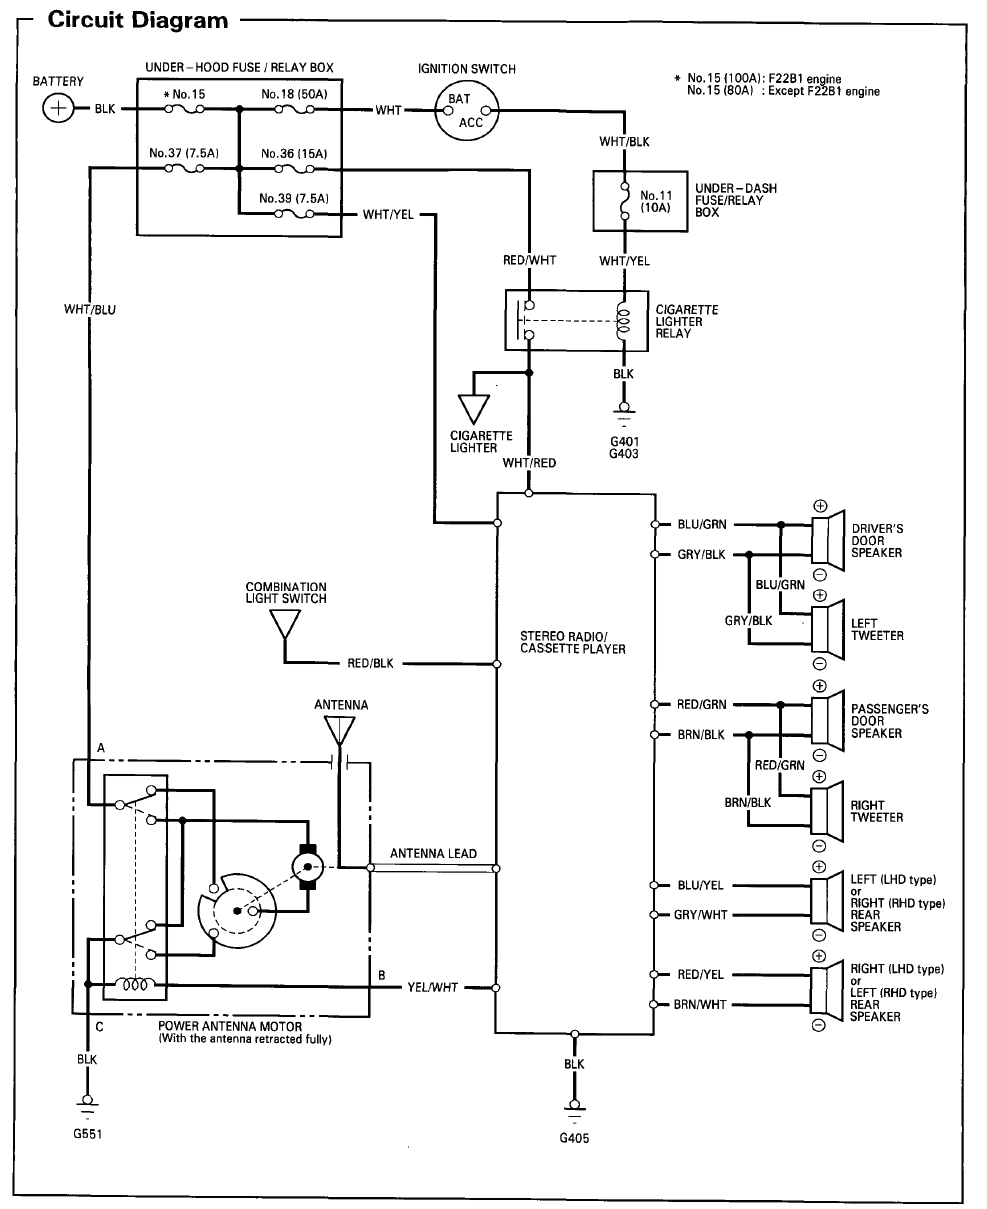 94 accord radio wiring diagram cant find the right one honda tech 1994 honda accord wiring diagram pdf 1994 accord wire diagram